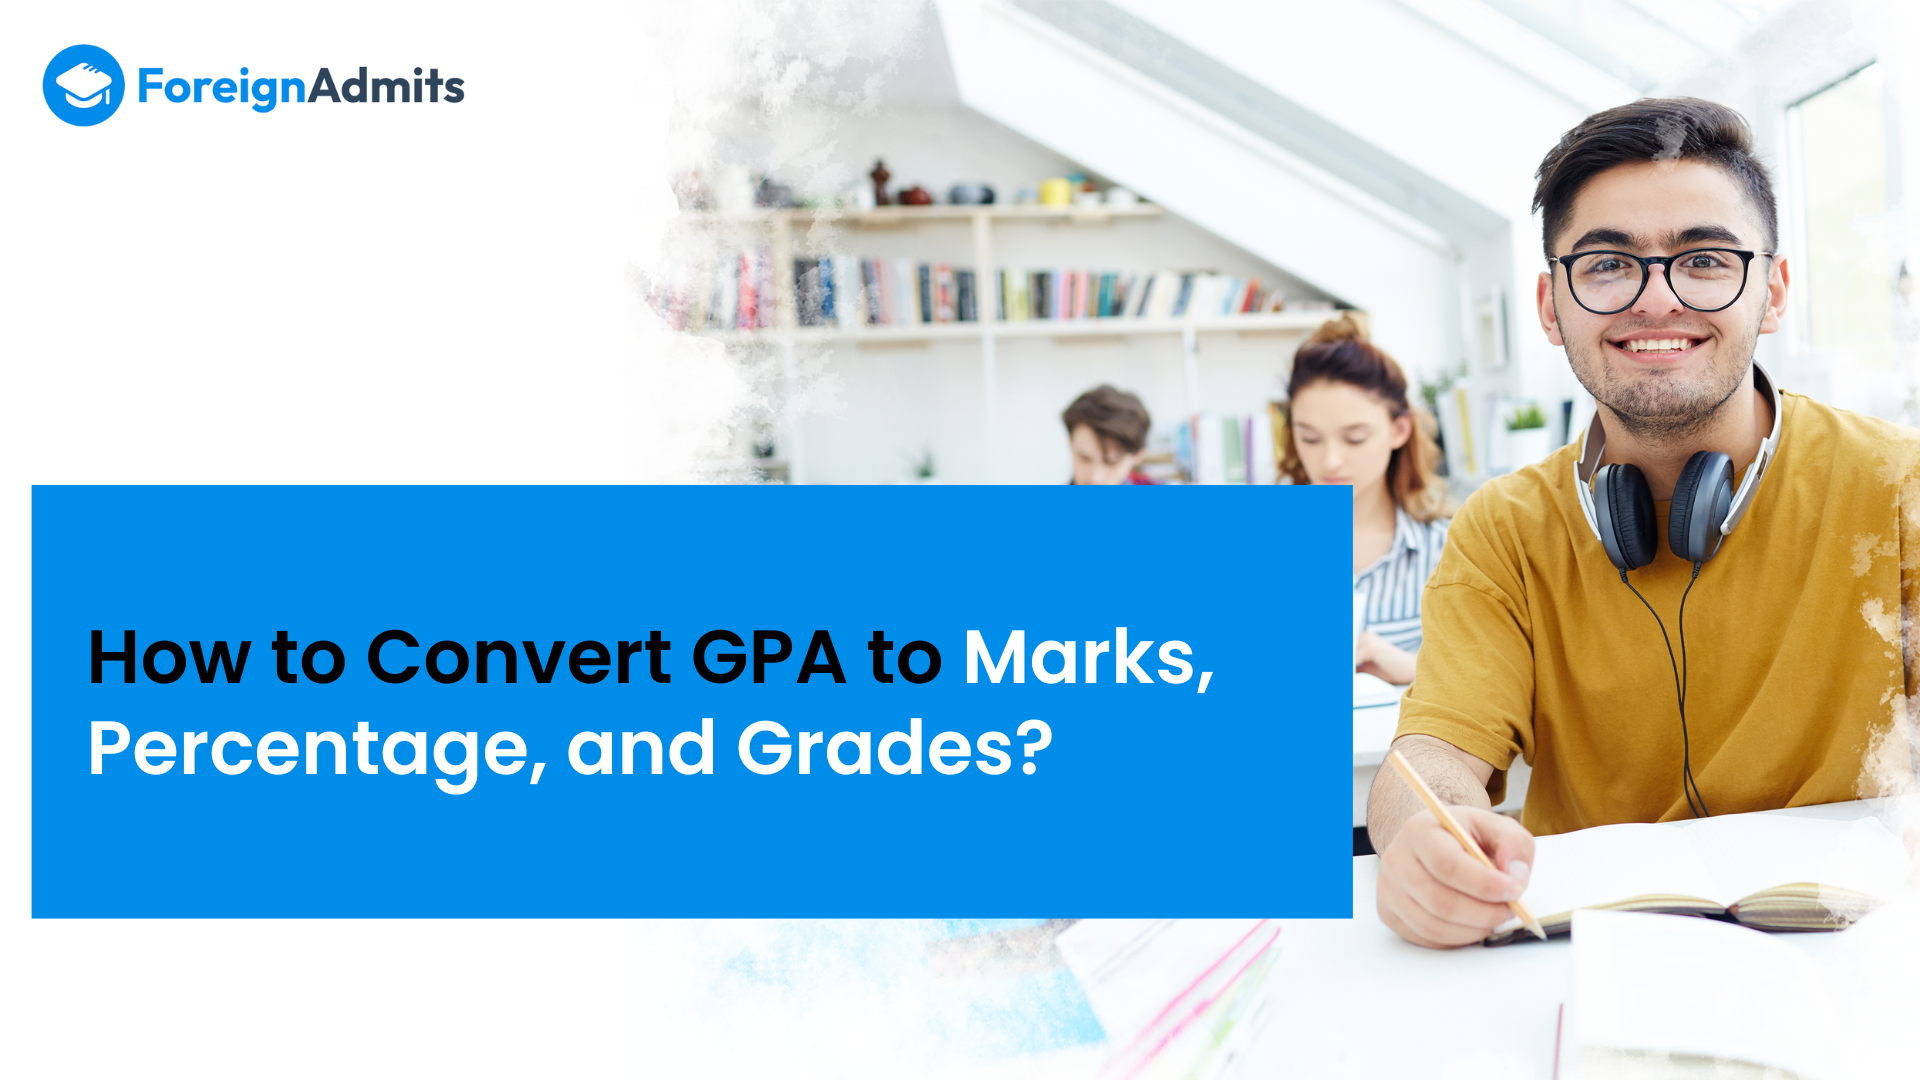 How to Convert GPA to Marks, Percentage, and Grades?